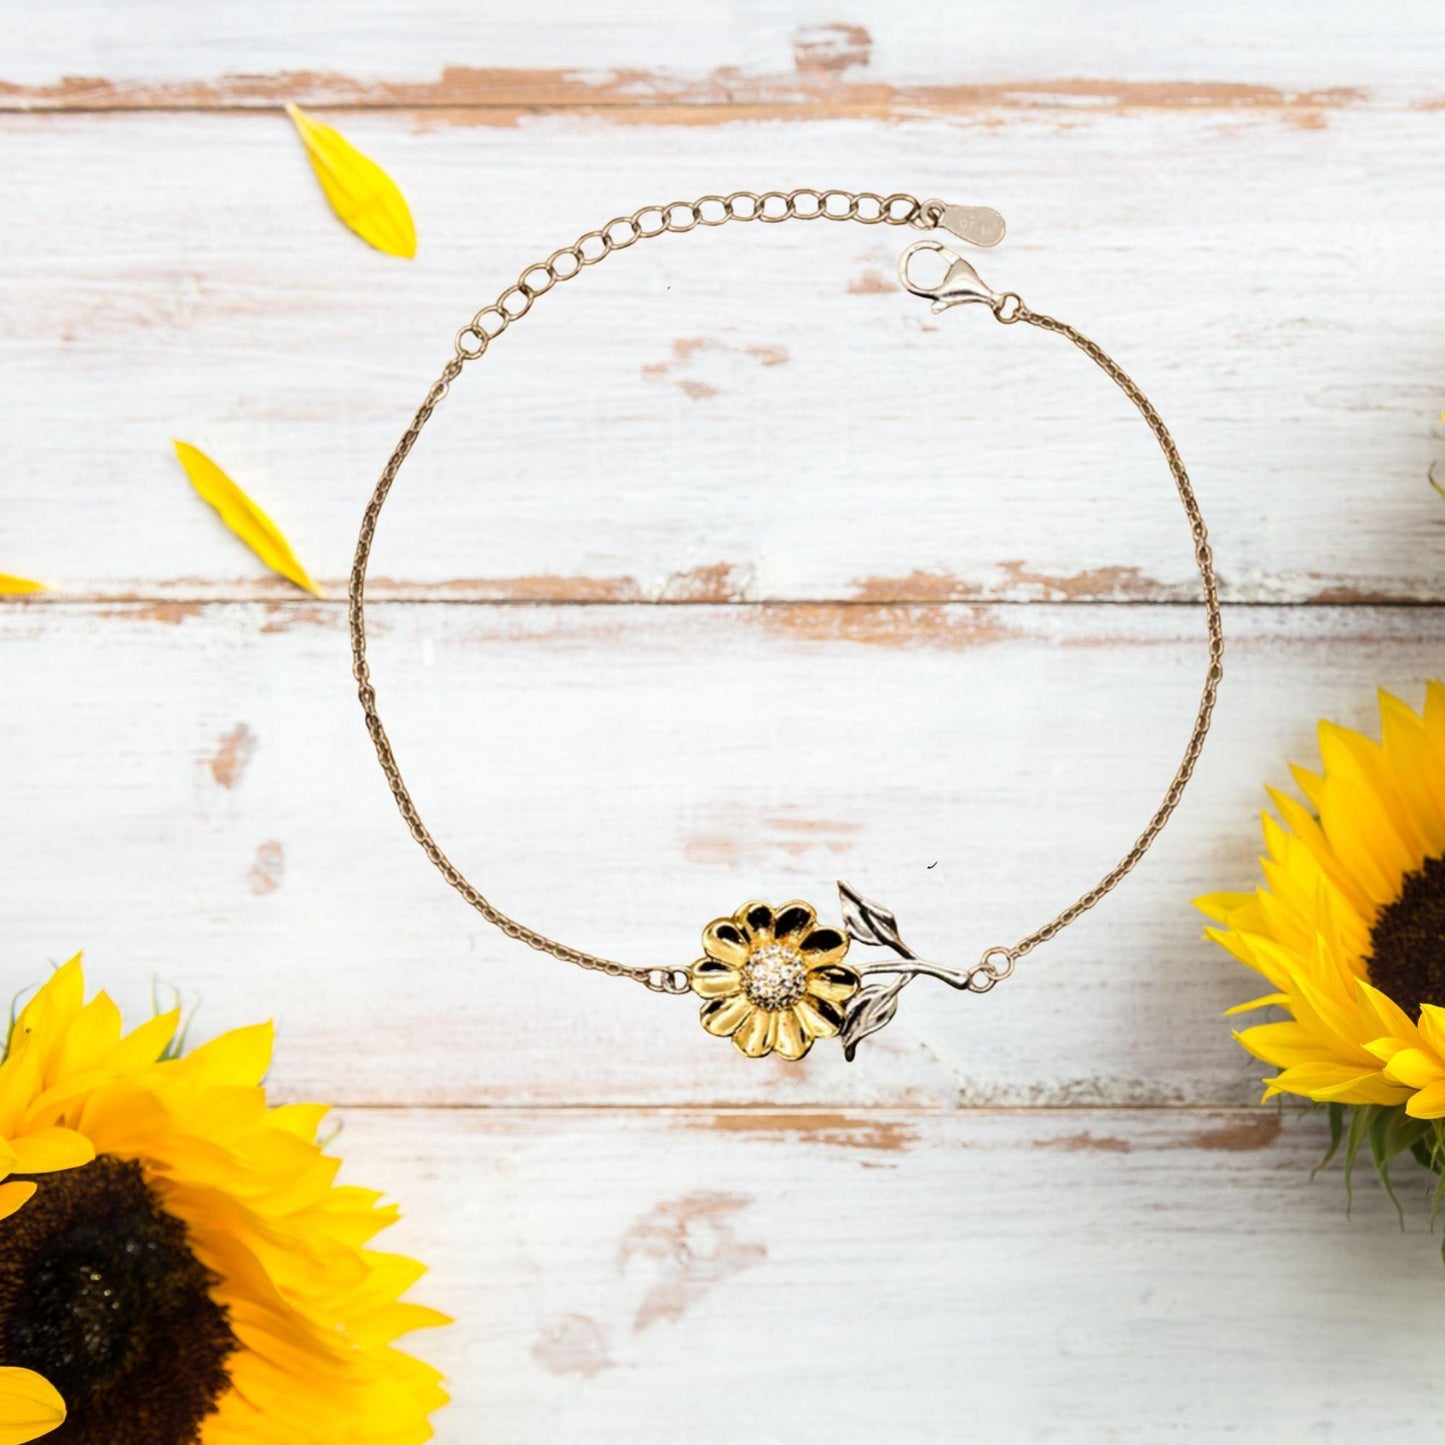 Remarkable Mechanical Engineer Gifts, Your dedication and hard work, Inspirational Birthday Christmas Unique Sunflower Bracelet For Mechanical Engineer, Coworkers, Men, Women, Friends - Mallard Moon Gift Shop